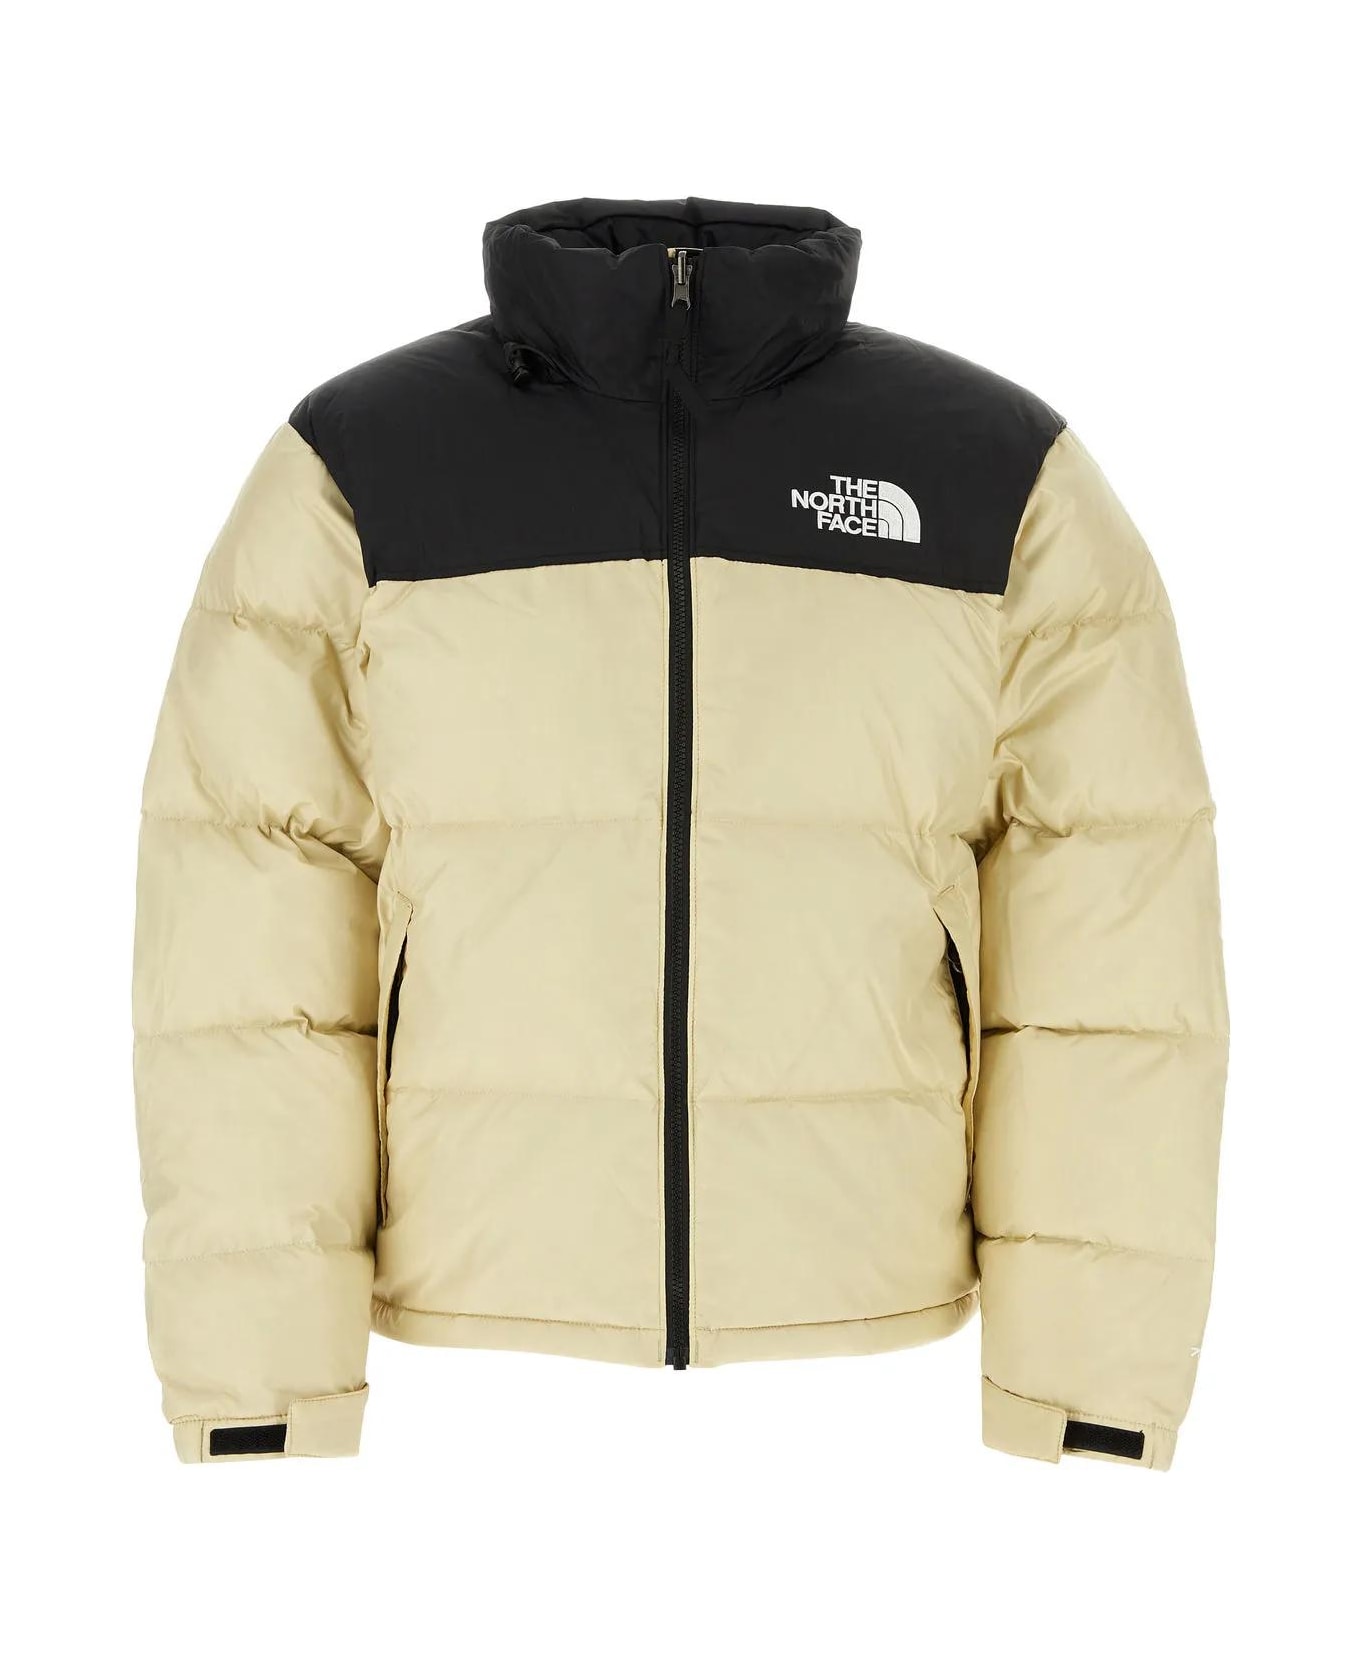 The North Face Two-tone Nylon Down Jacket - Gravel